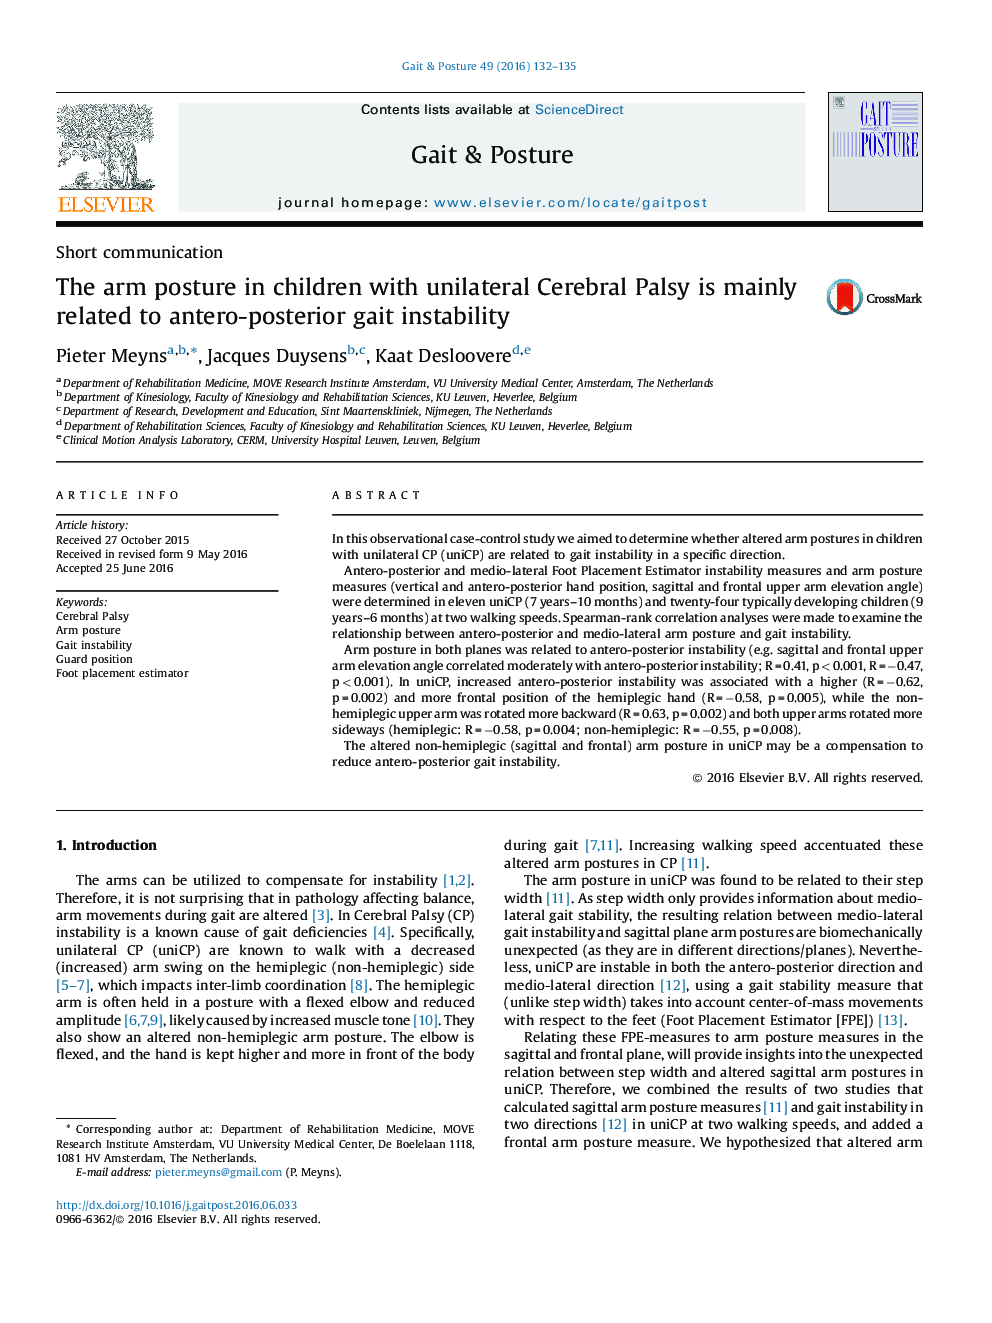 The arm posture in children with unilateral Cerebral Palsy is mainly related to antero-posterior gait instability